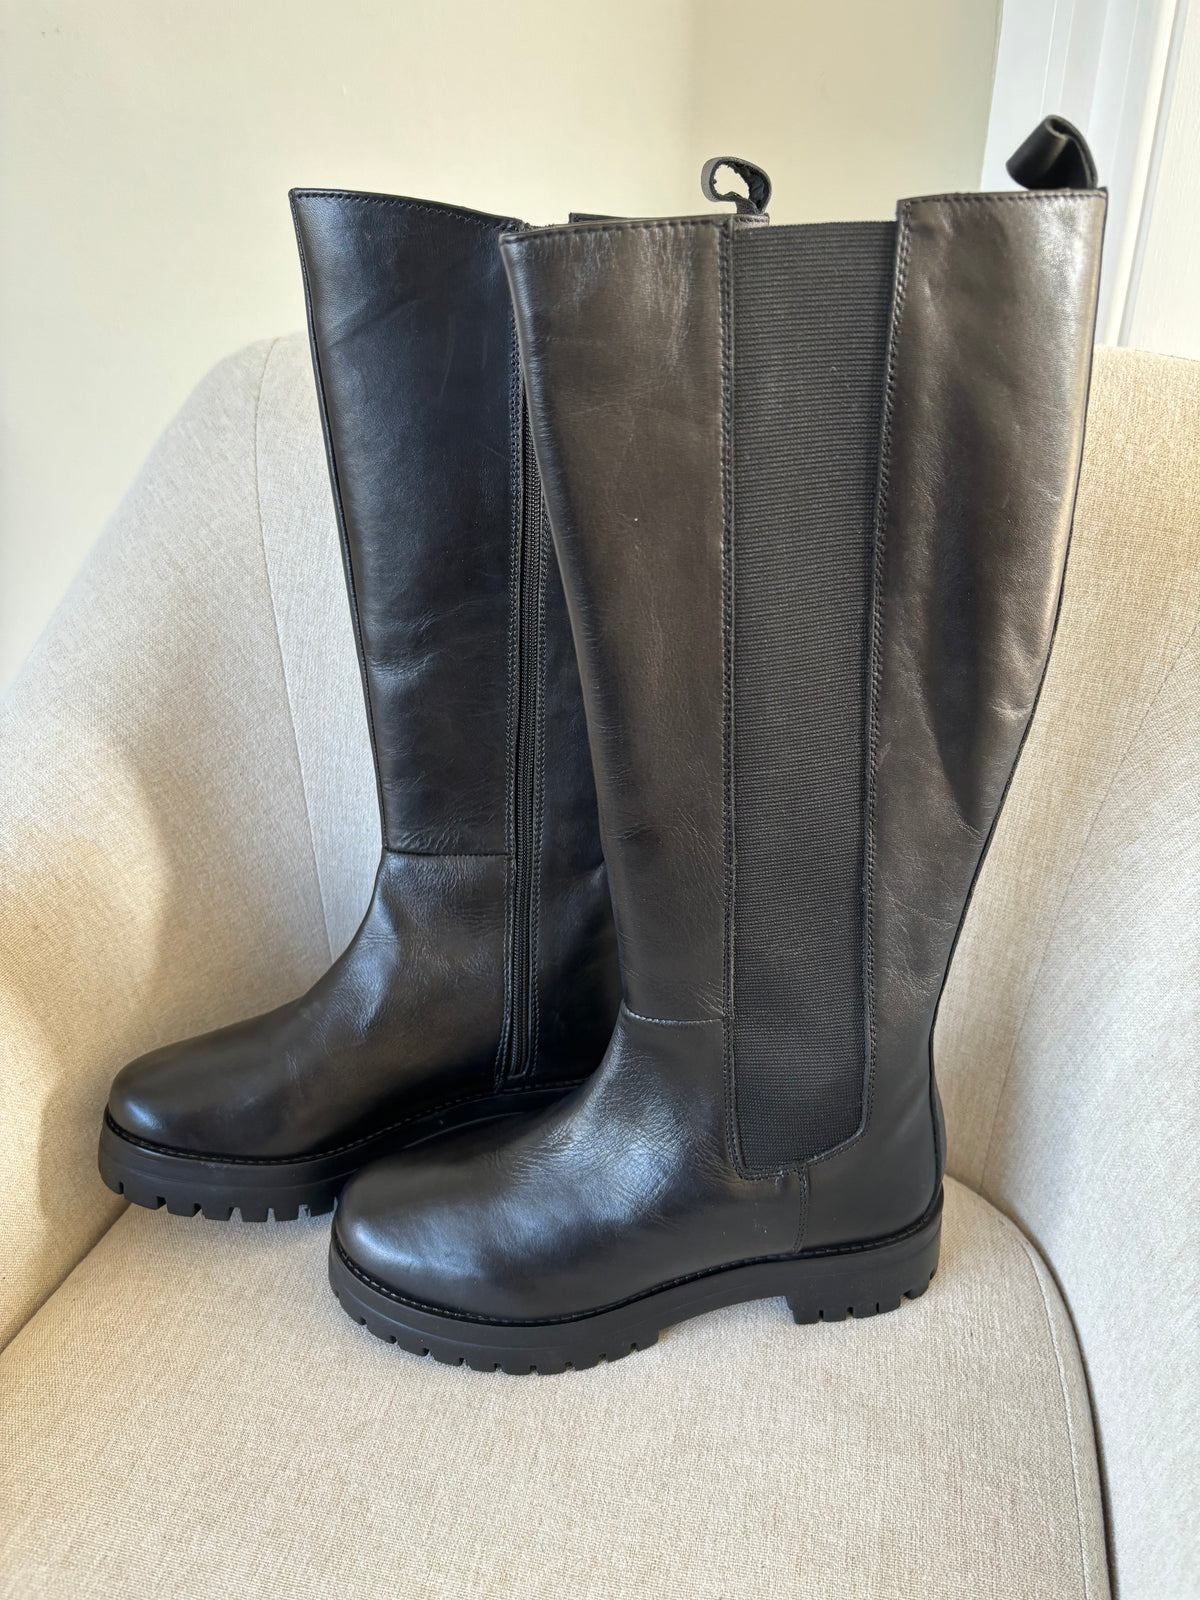 Black Leather Chunky Long Boots by Freemans Size 7